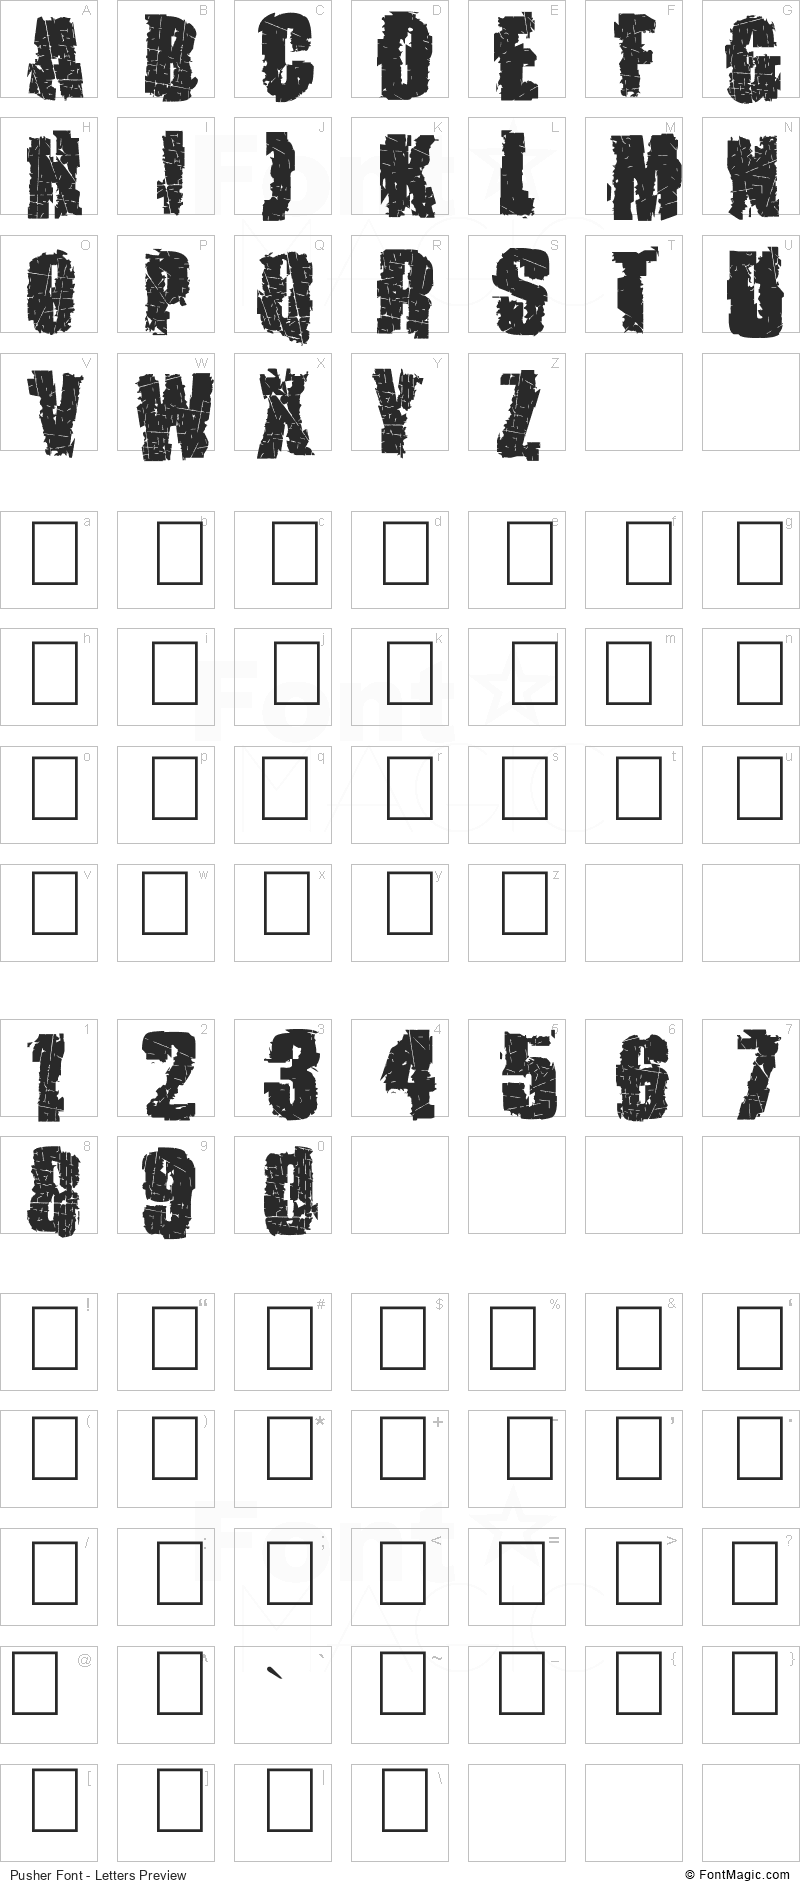 Pusher Font - All Latters Preview Chart